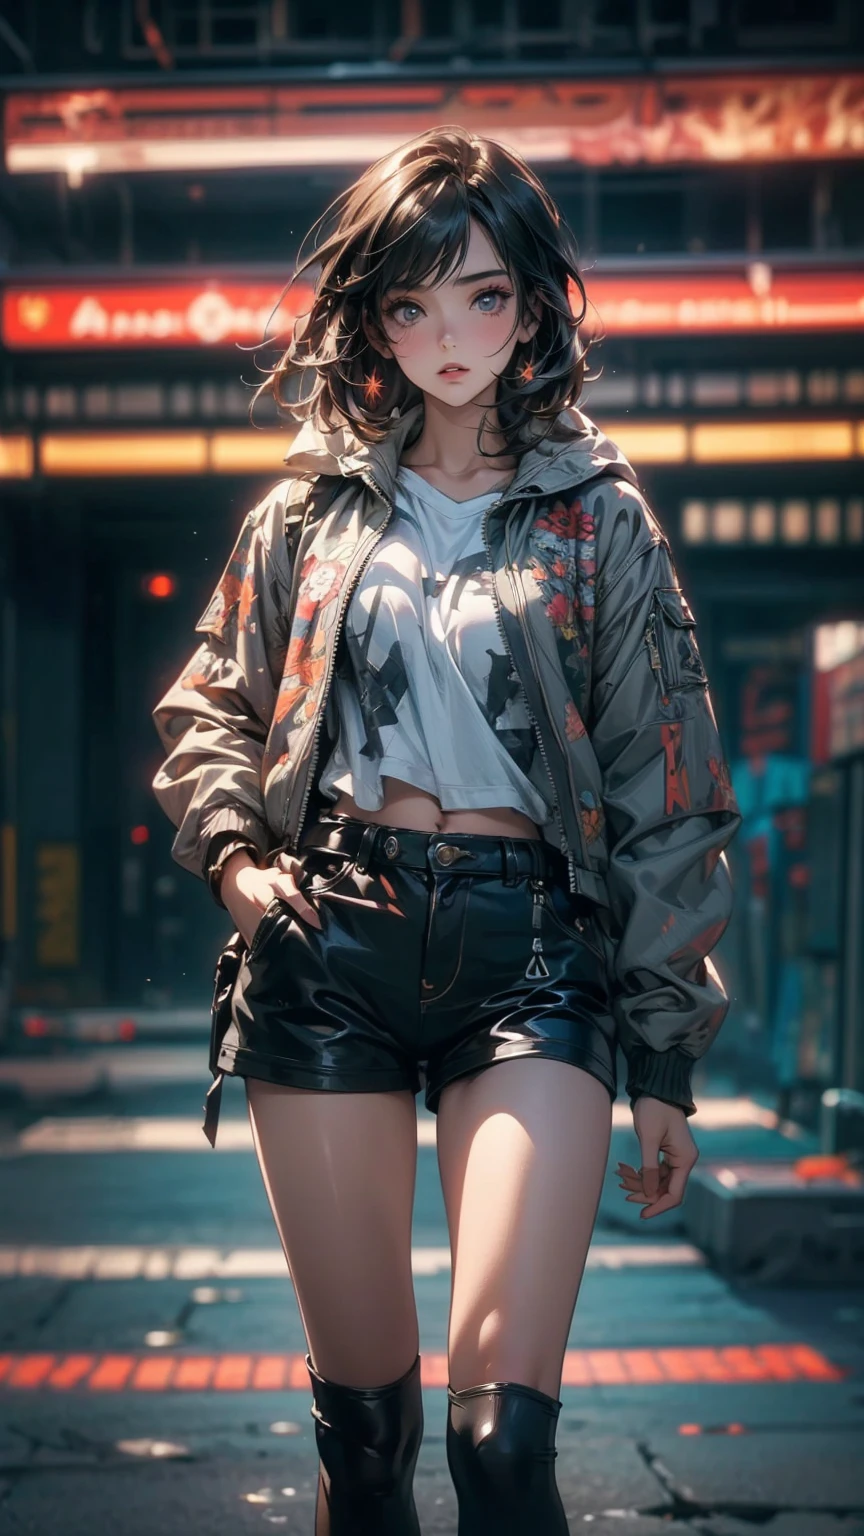 ((Highly detailed CG unit 8K wallpaper, masterpiece, High resolution, highest quality)), Structure from head to thighs:1.3, Upper body focus, 20 year old woman with dark hair, Avant-garde makeup, Hands in pockets pose:1.5, Grunge Fashion:1.2, wear a blouson:1.2, Blurred Background, A colorful, deserted alley, Cinema Lighting, Anime Style, Simple lines, Digital Painting,